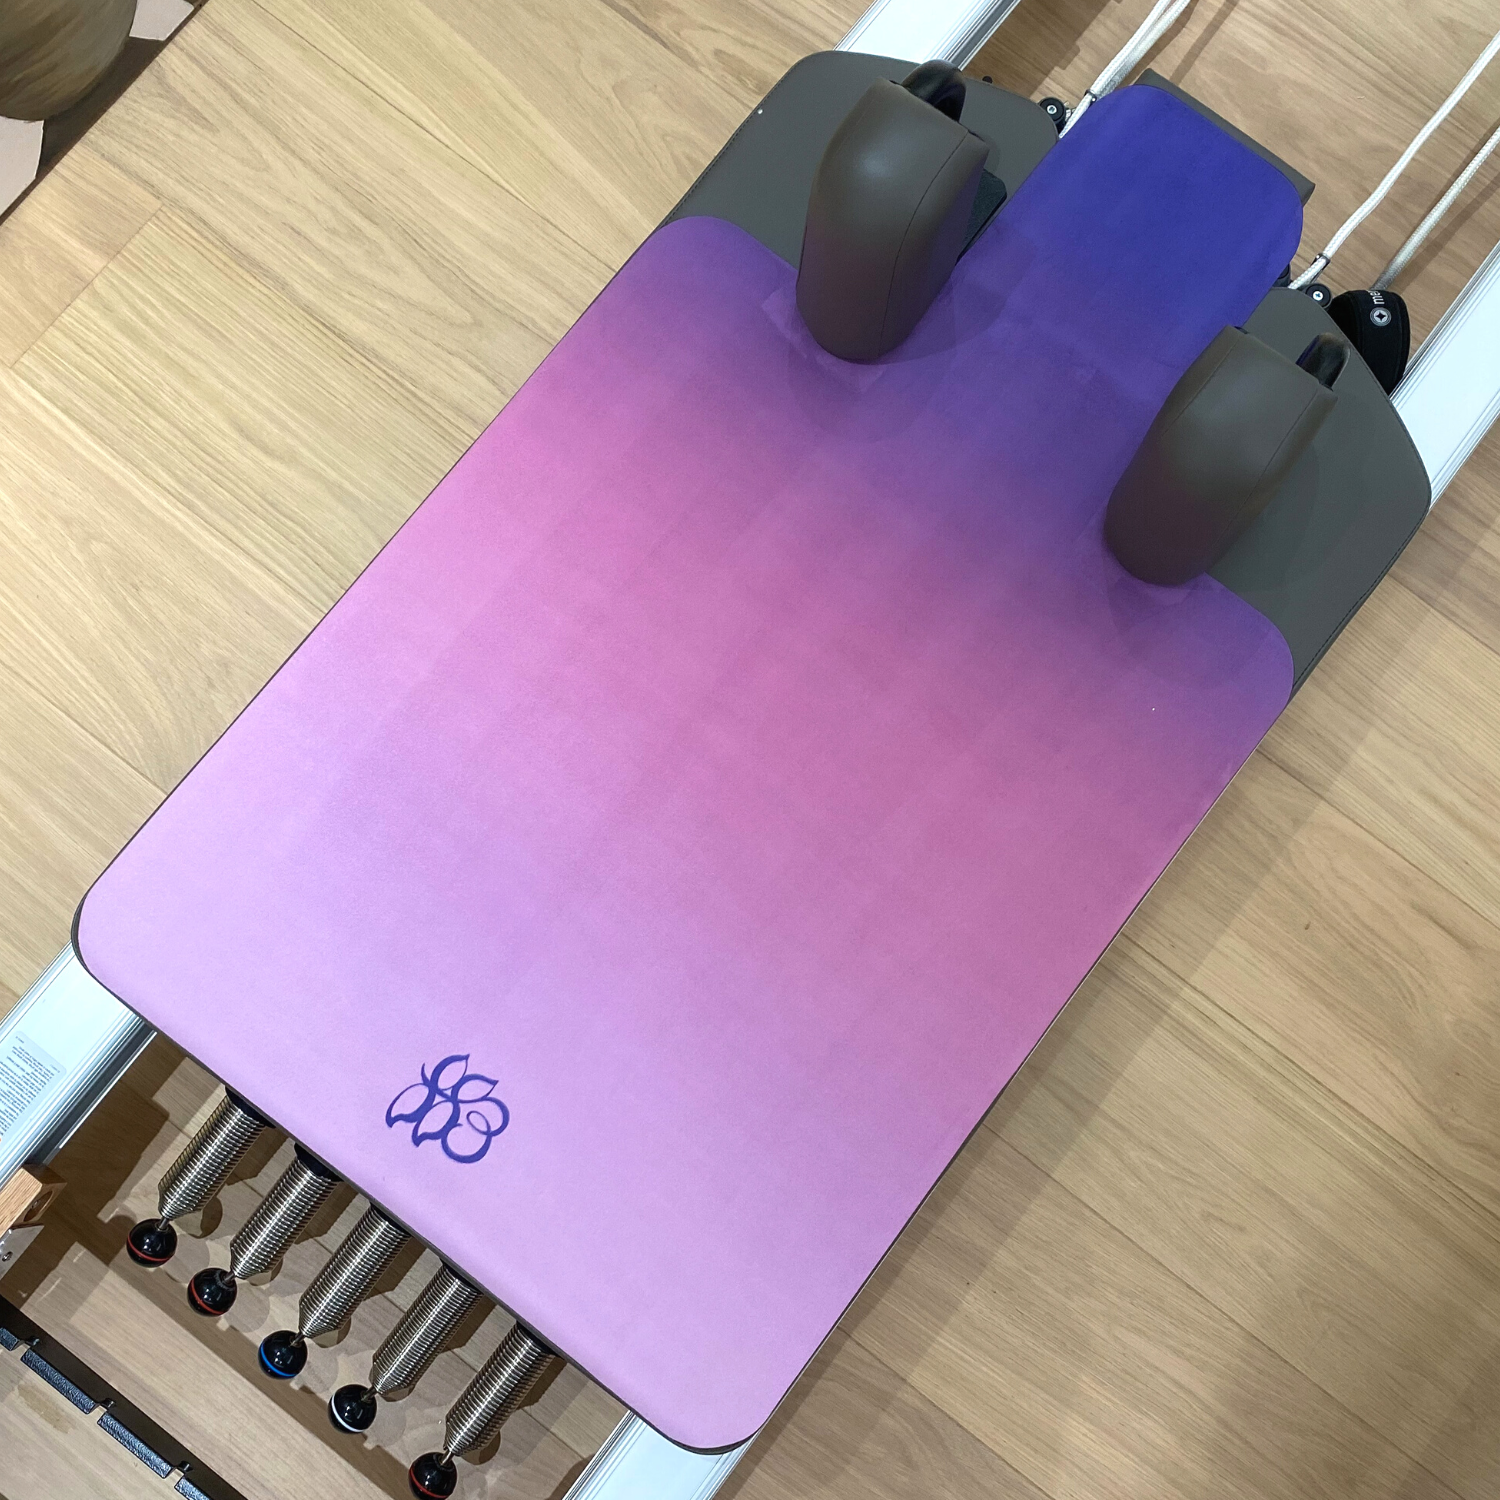 HavoBody Pilates Reformer Mat Towel - Reformer Cover Protector with Sweat  Absorbing Grip, Pilates Equipment Accessories for Home and Class - Soft,  Non-Slip, Hygienic, Quick Dry (Pride & Pastel), Sports & Outdoors 